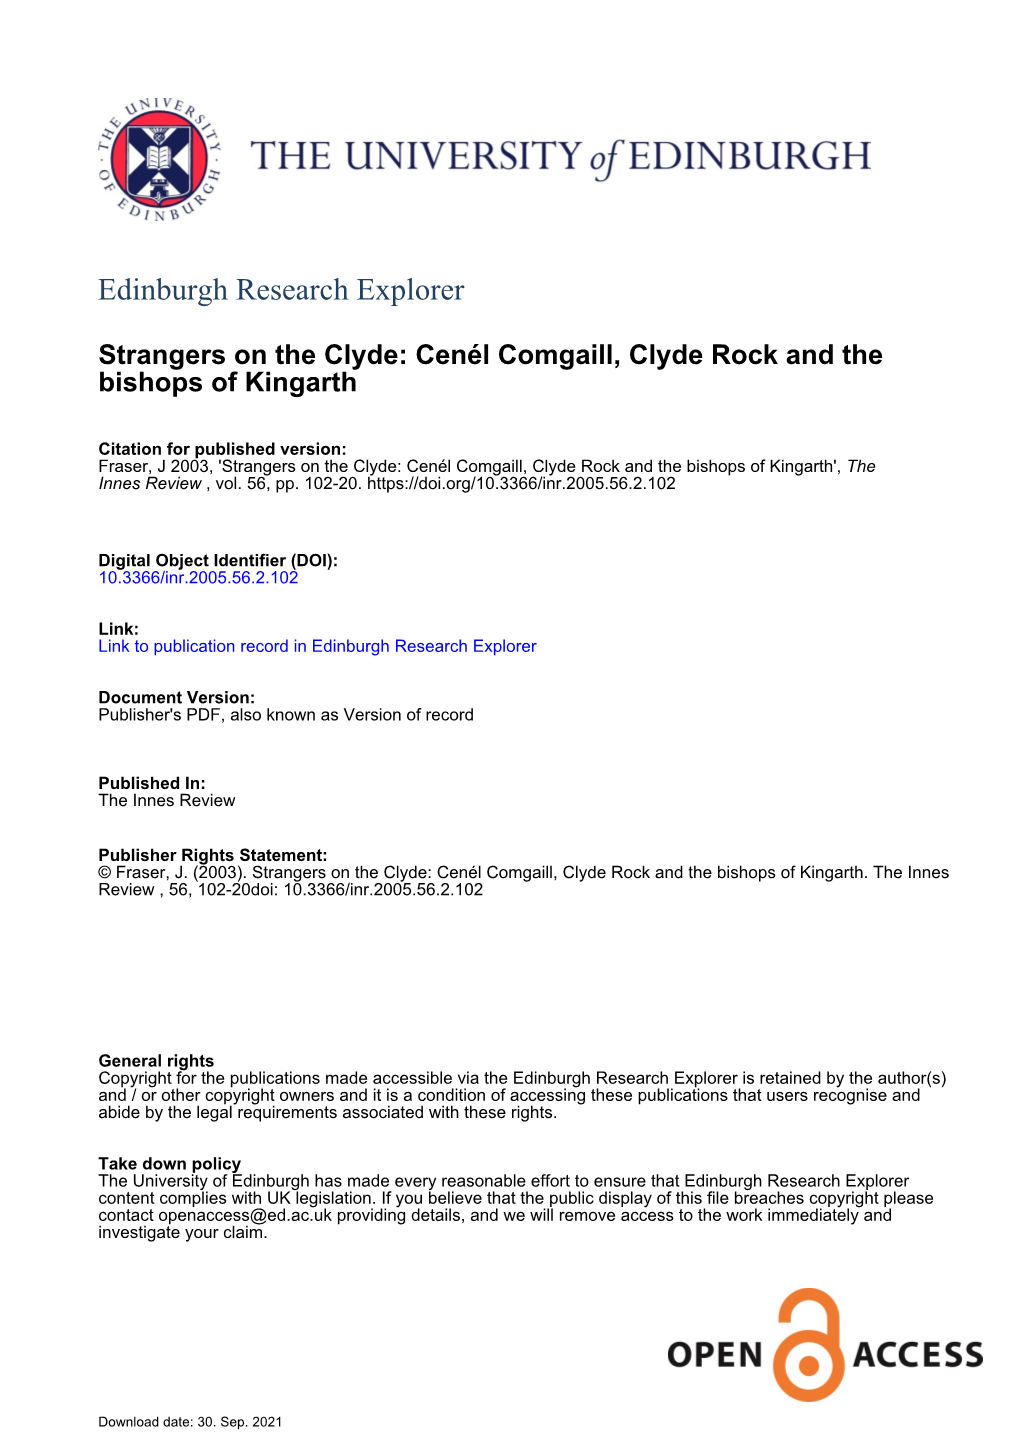 Strangers on the Clyde: Cenél Comgaill, Clyde Rock and the Bishops of Kingarth